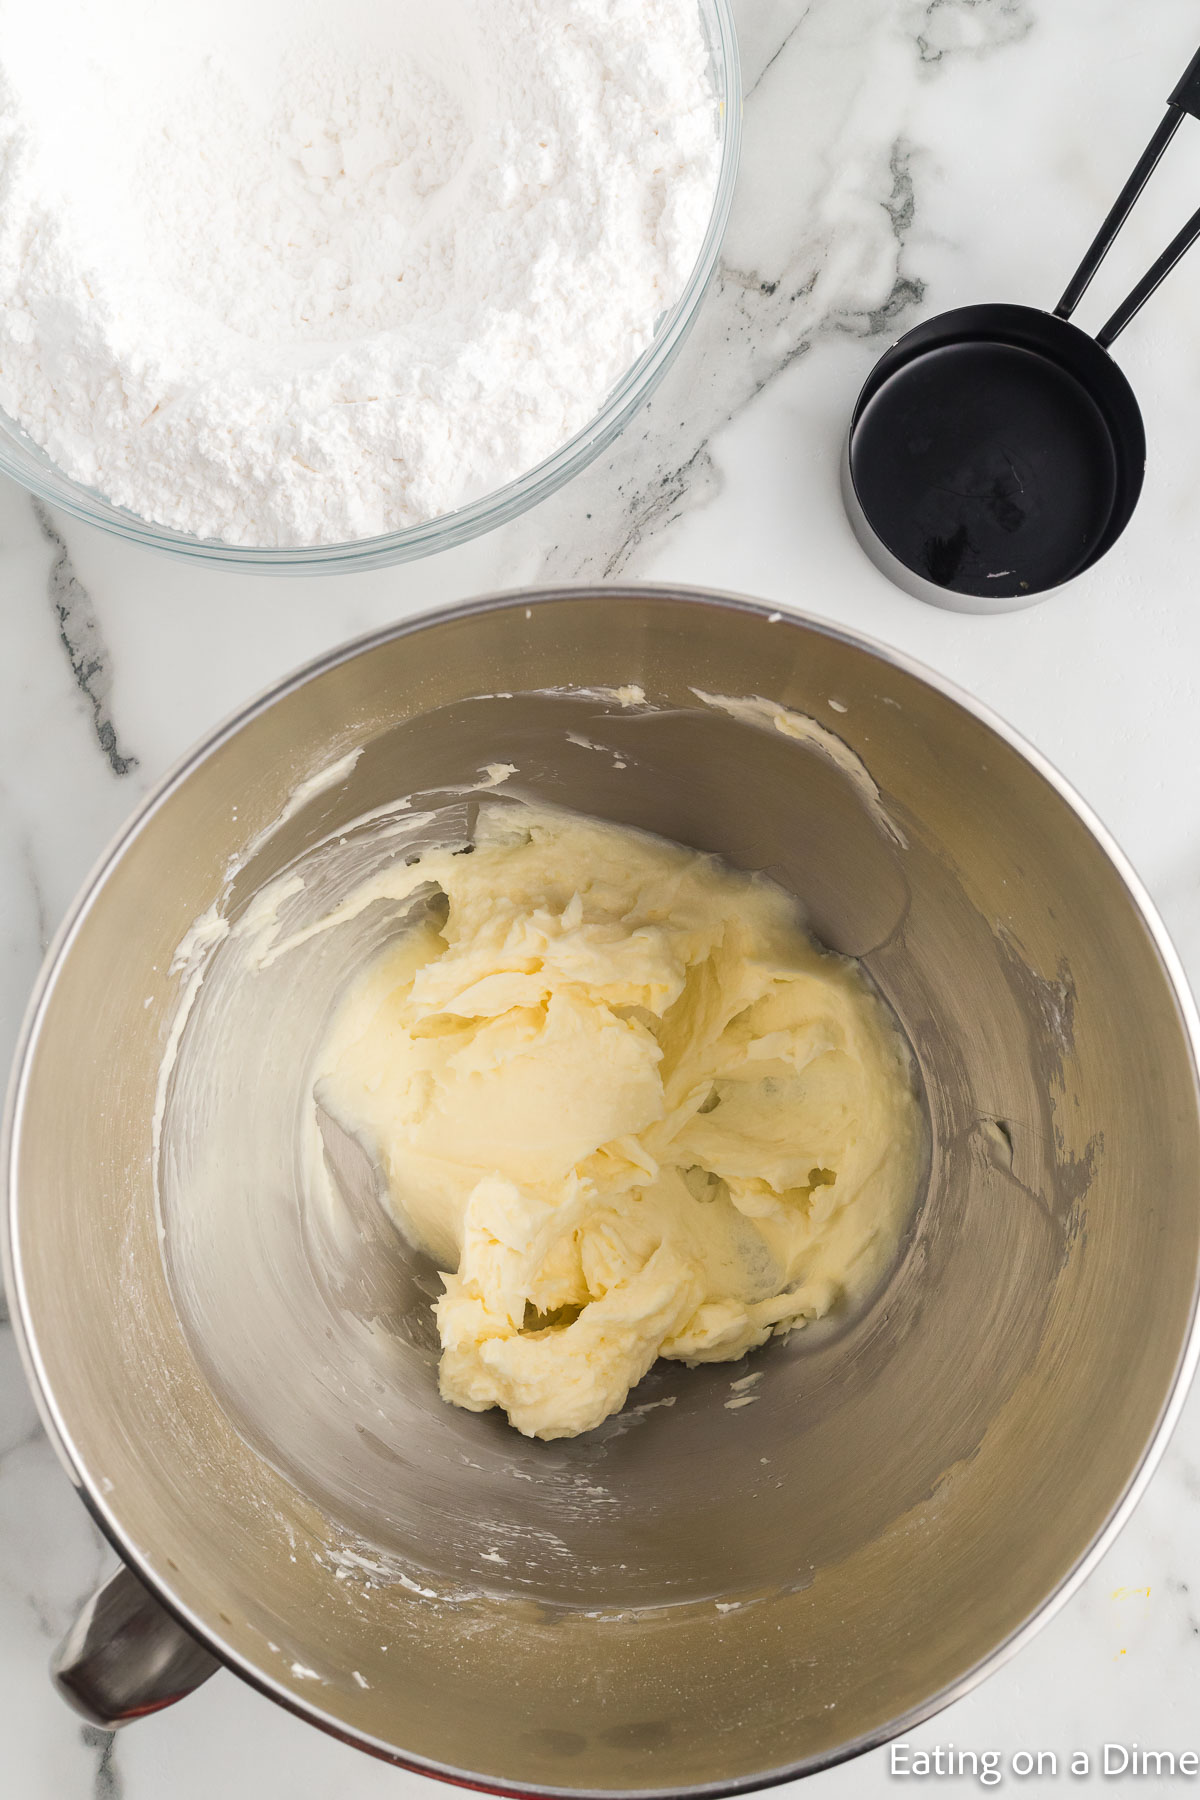 Adding the powdered sugar to the butter mixture